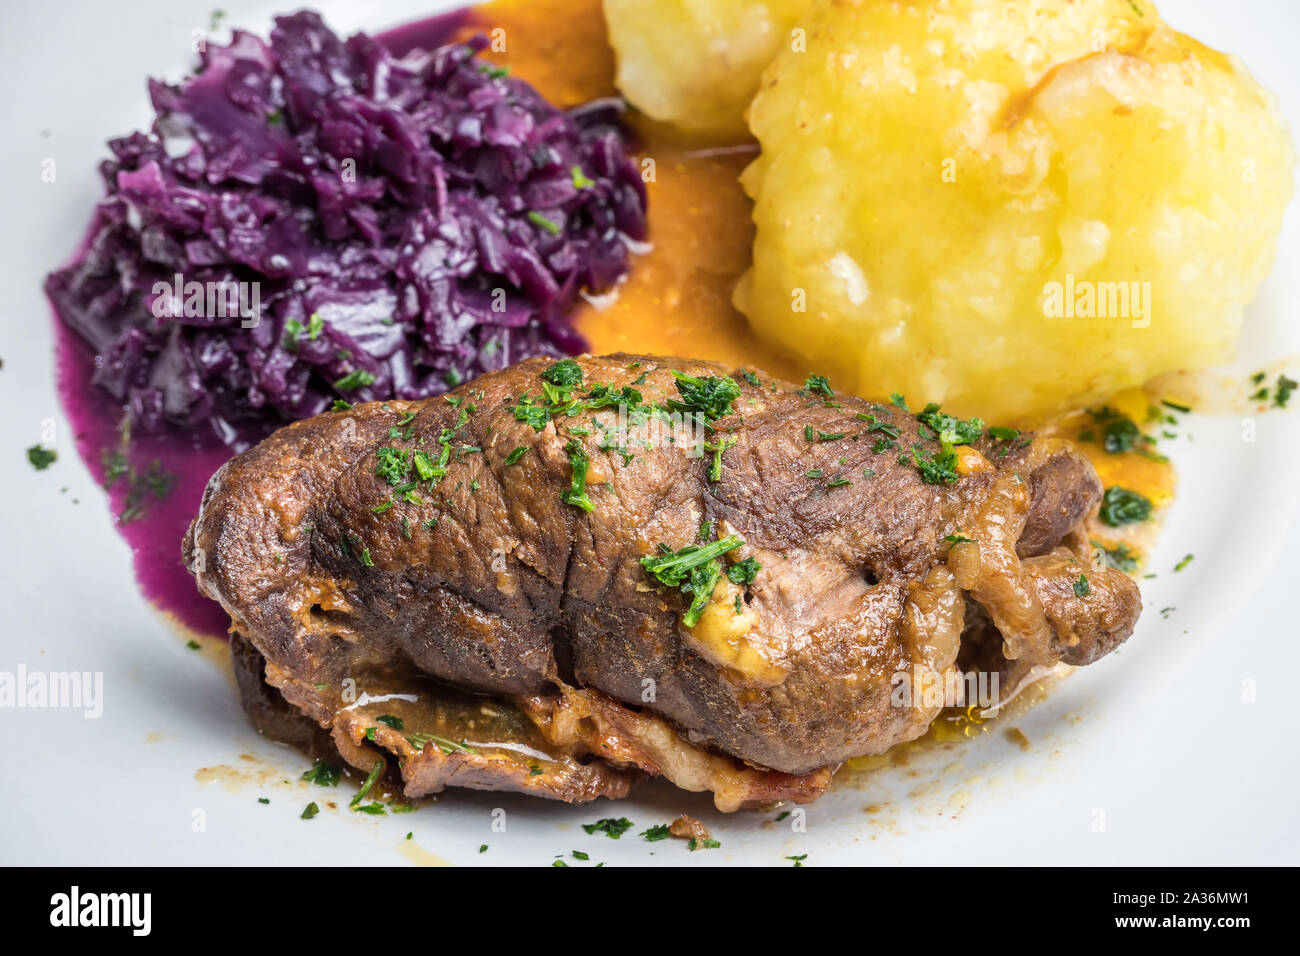 Beef roulade franconian Stock Photo